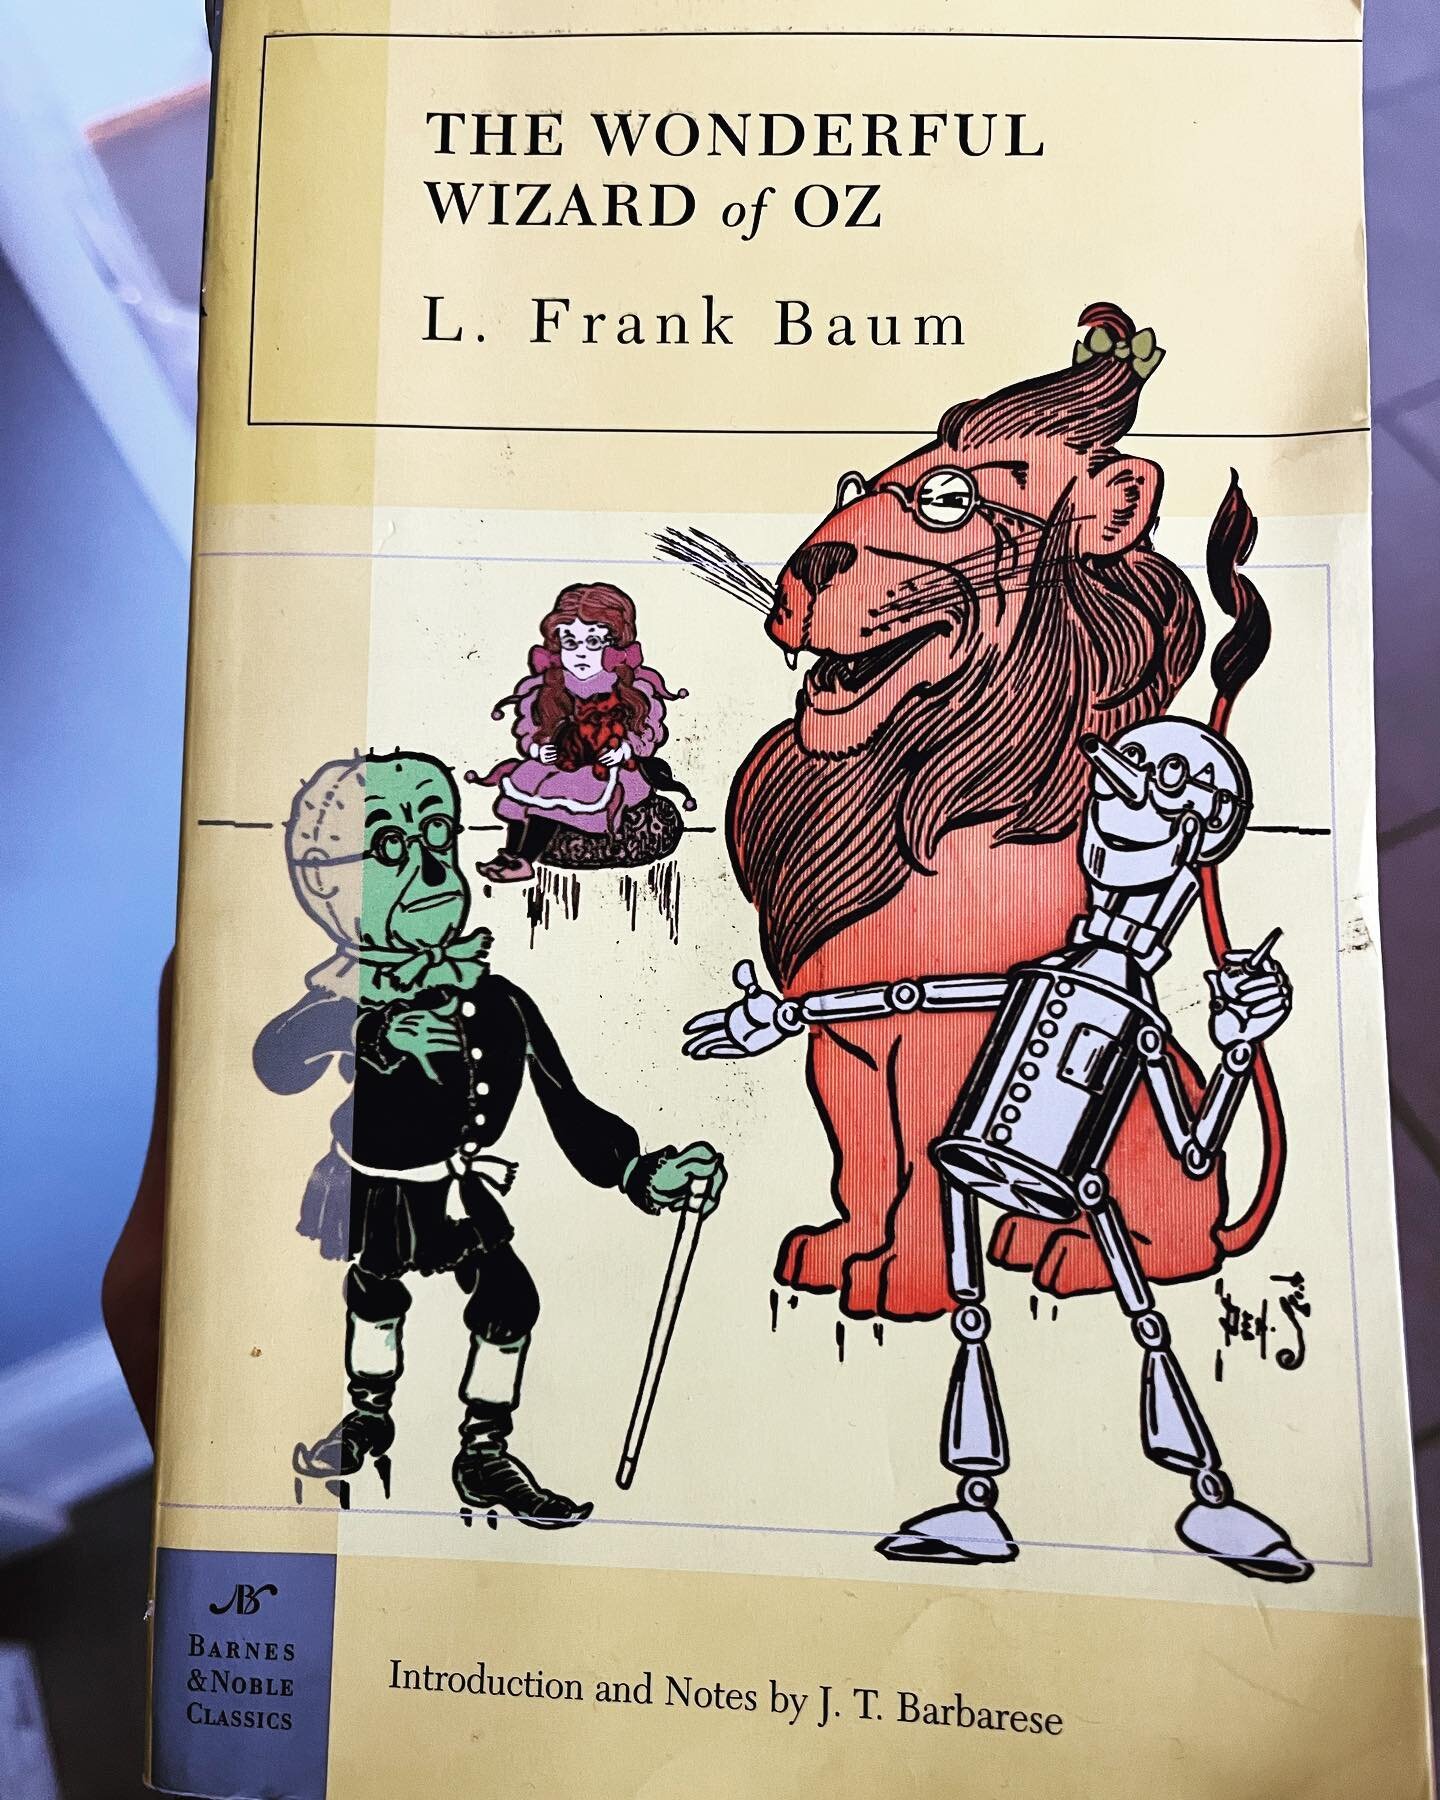 Holiday reading. The Wonderful Wizard of Oz, L. Frank Baum, published 1900.